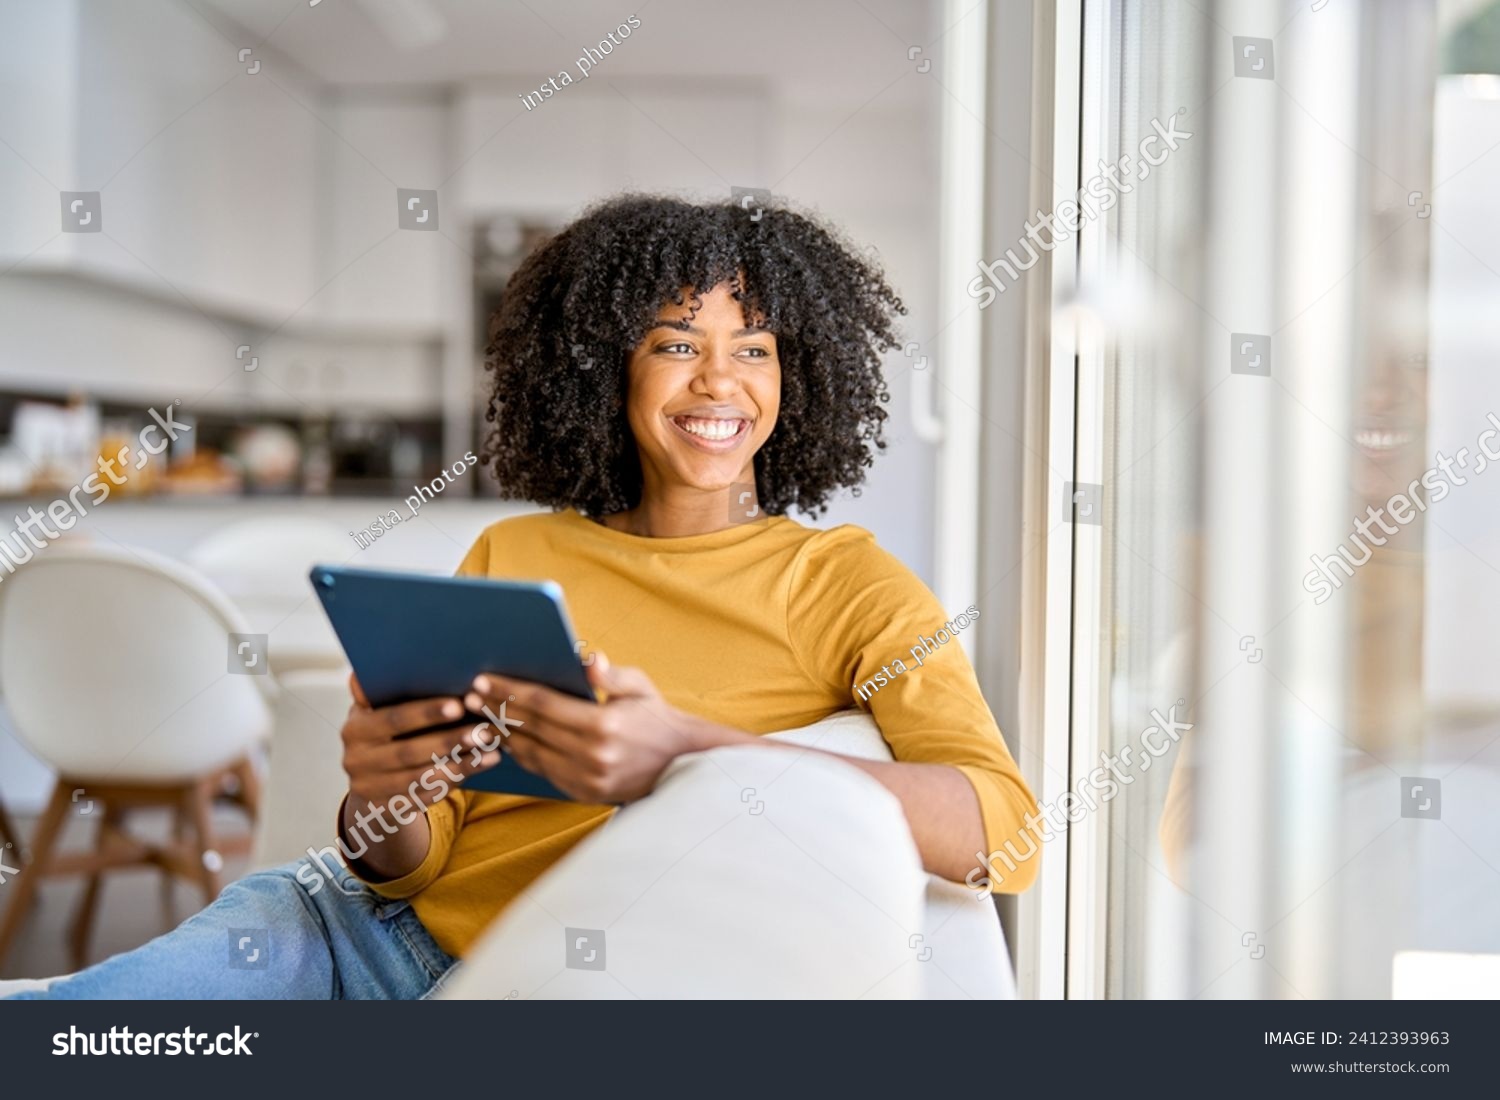 Happy African American lady using tab device looking away on sofa at home. Smiling pretty young woman sitting on couch relaxing looking away at window holding digital table in kitchen. #2412393963